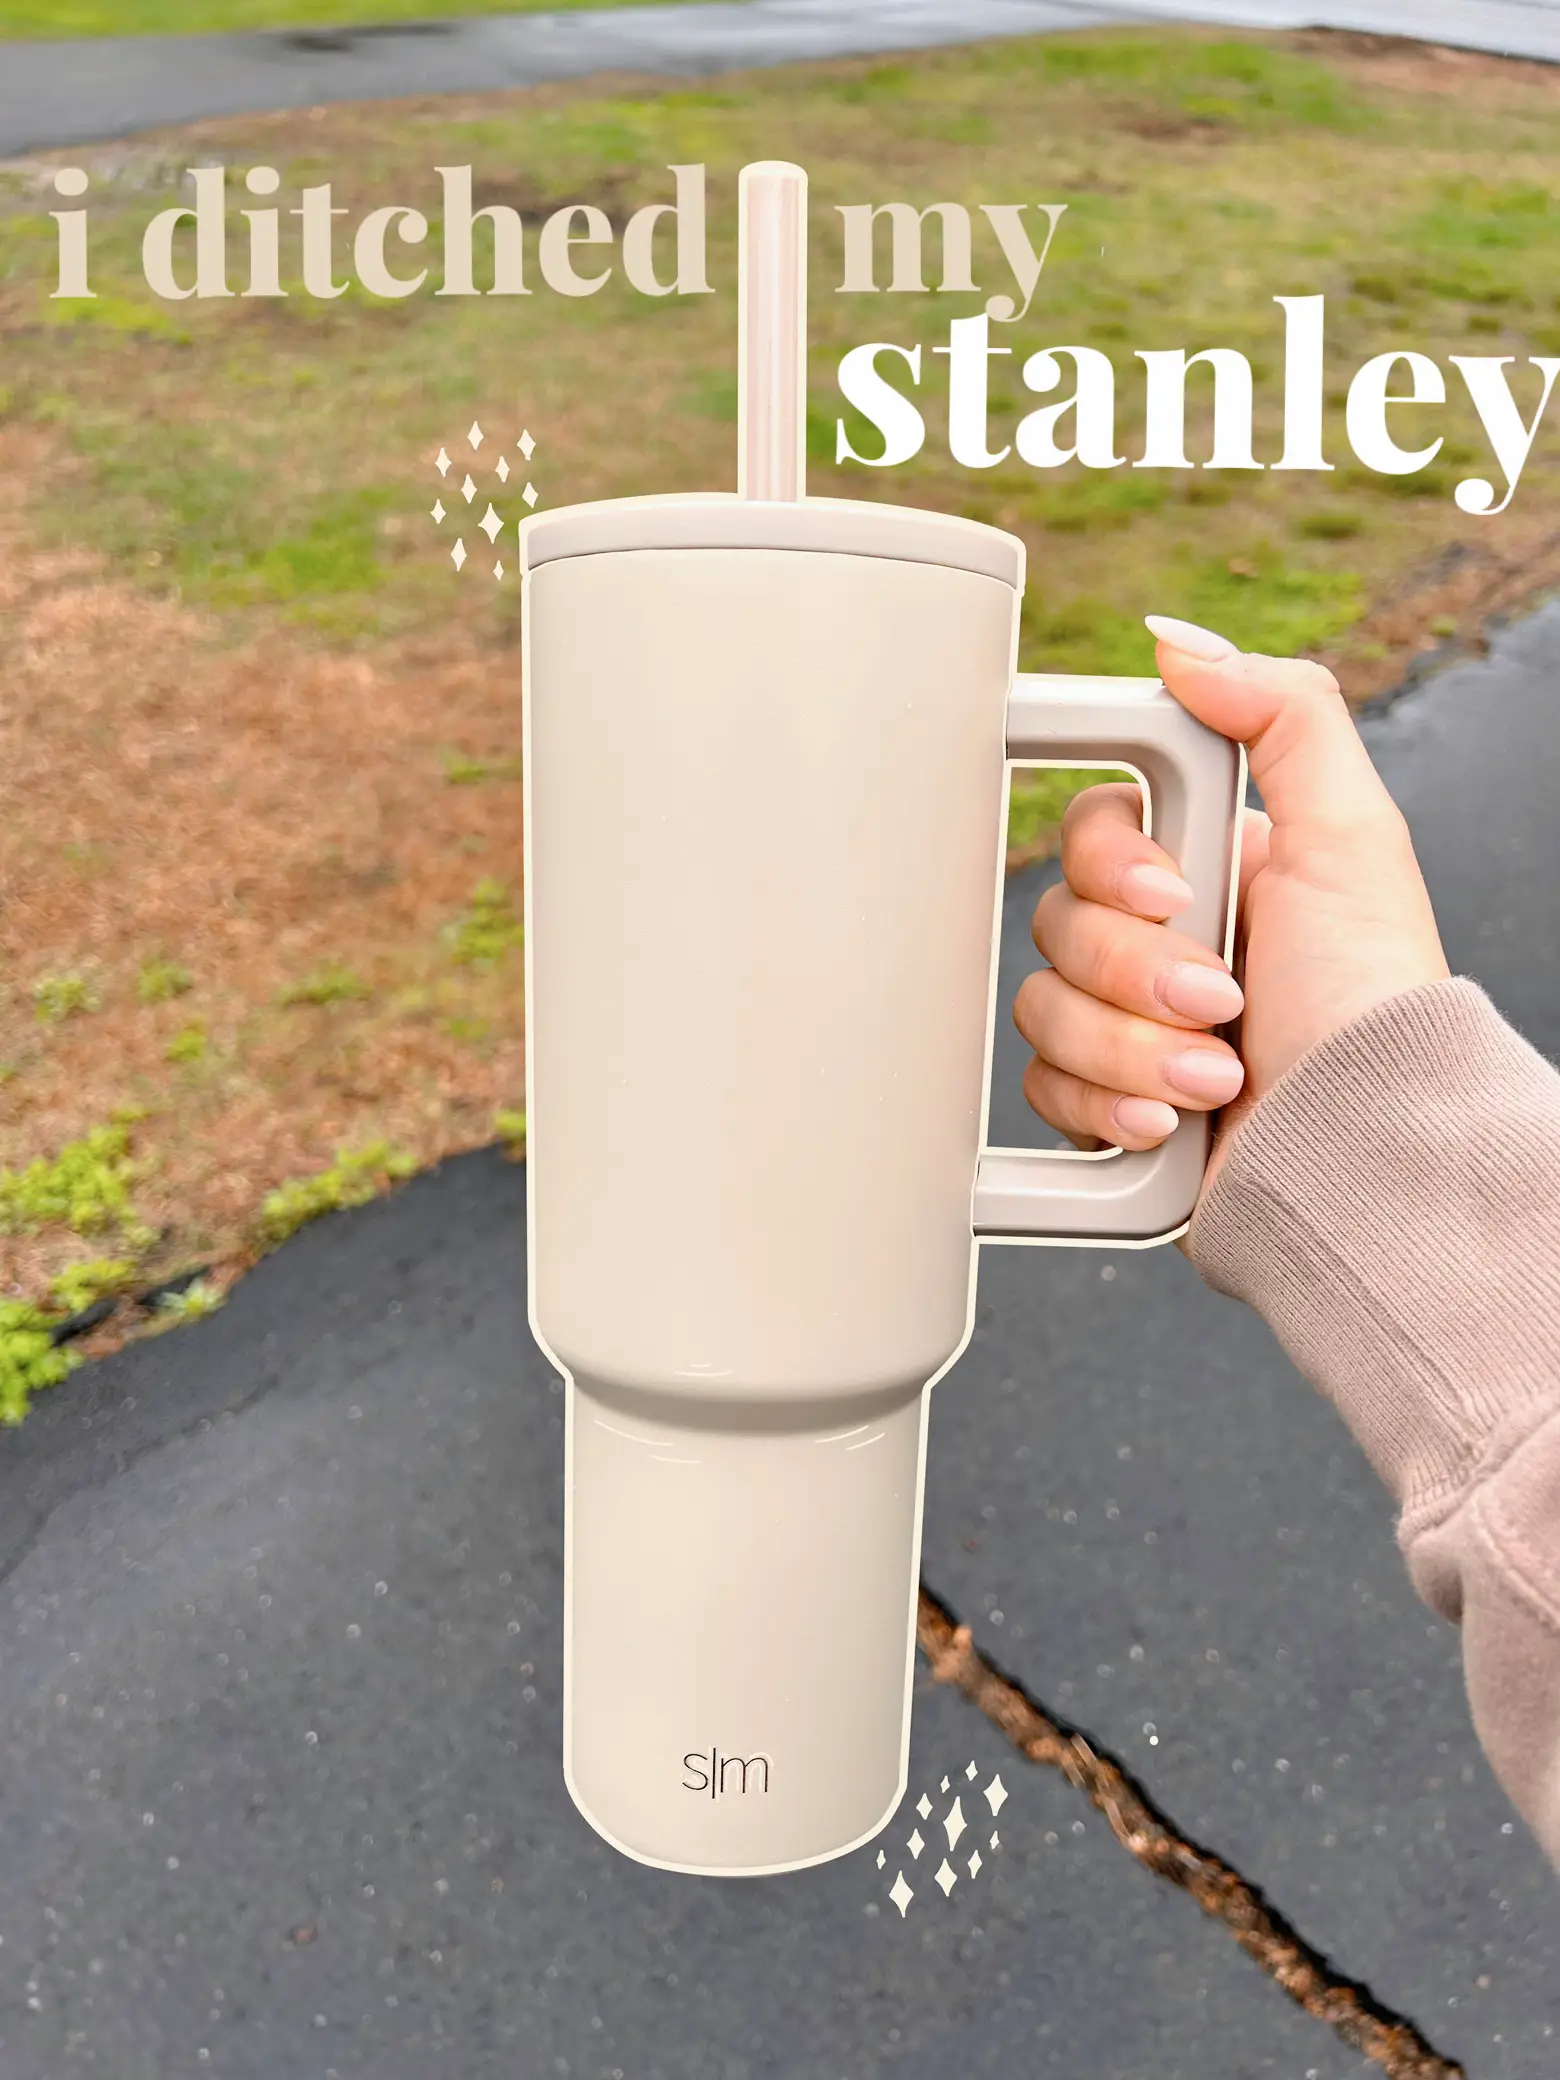 Stanley Thirst Quencher i love this cup. Im a straw person but did